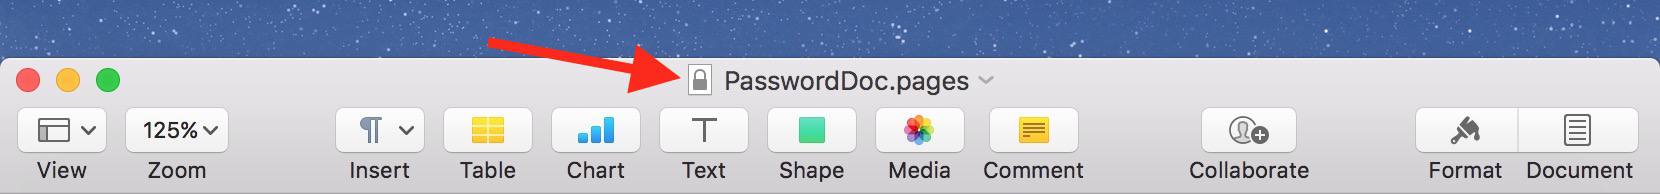 Title Bar showing Pages document is password protected